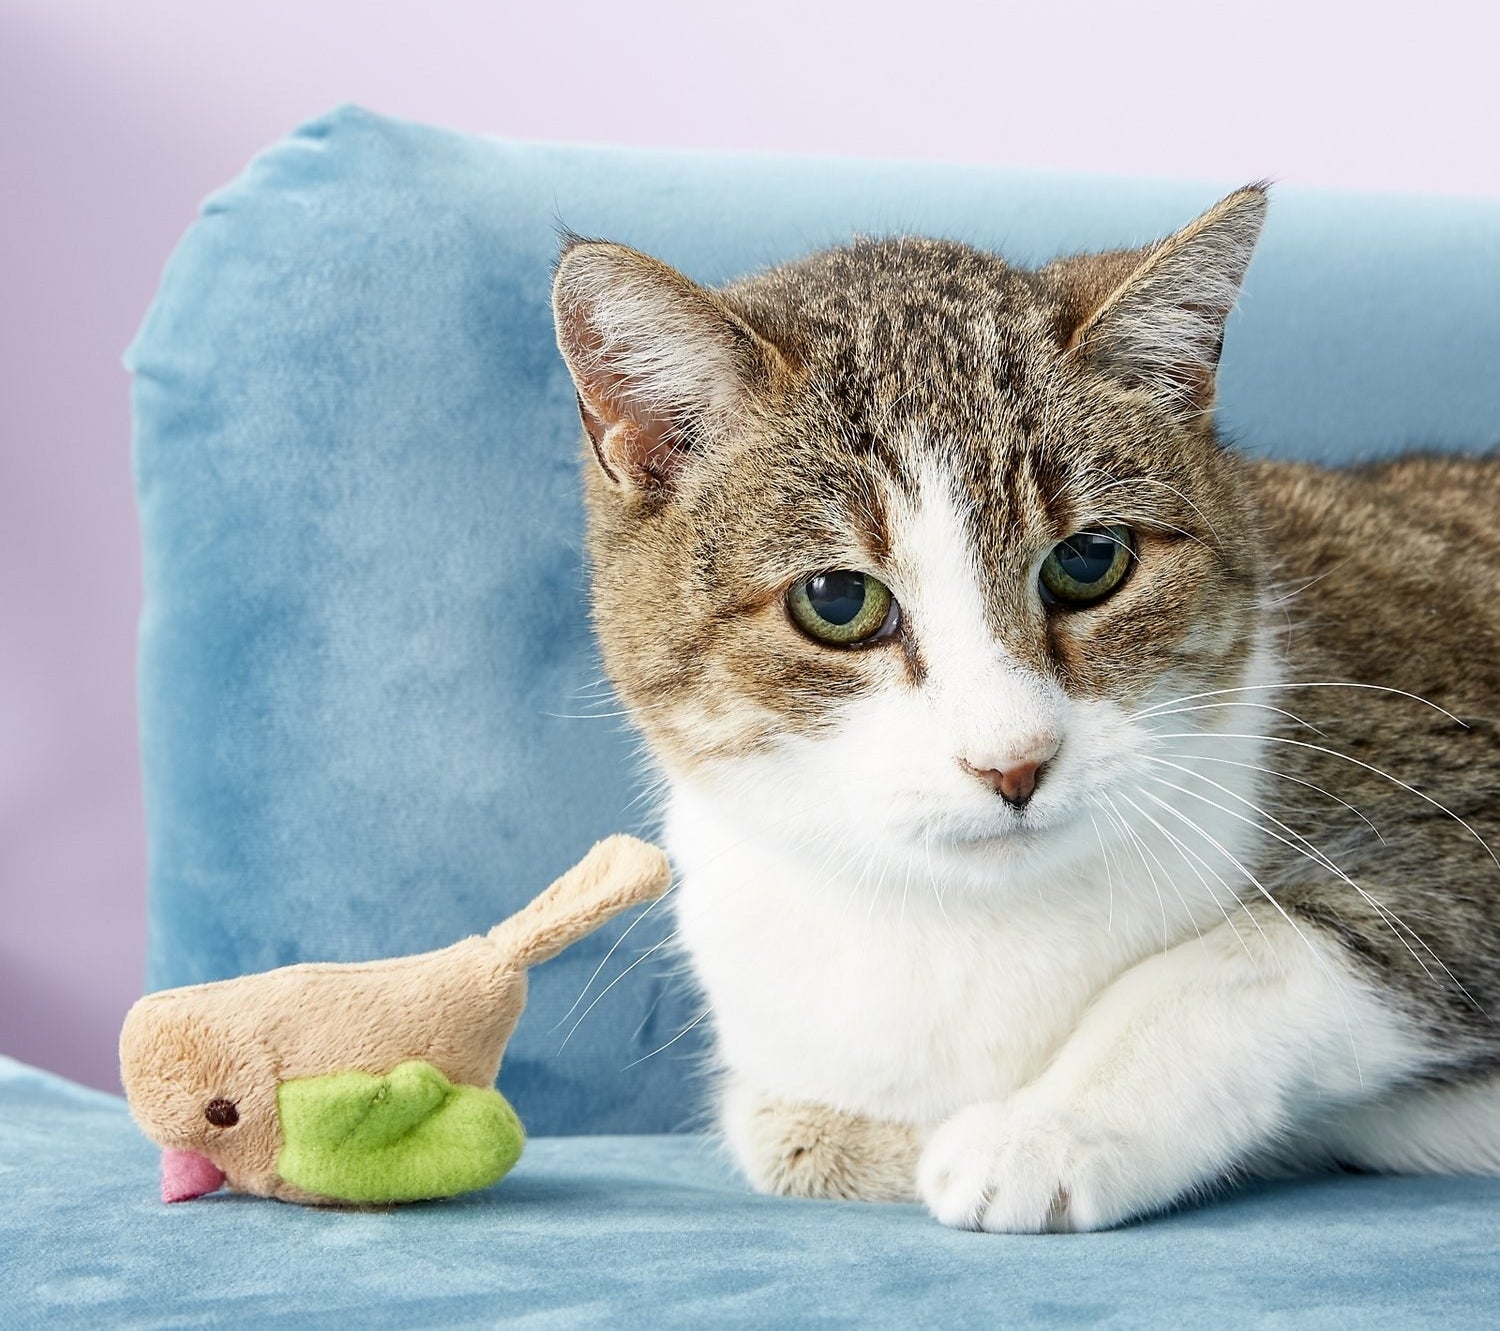 Brown and white cat next to brown and green plush bird toy